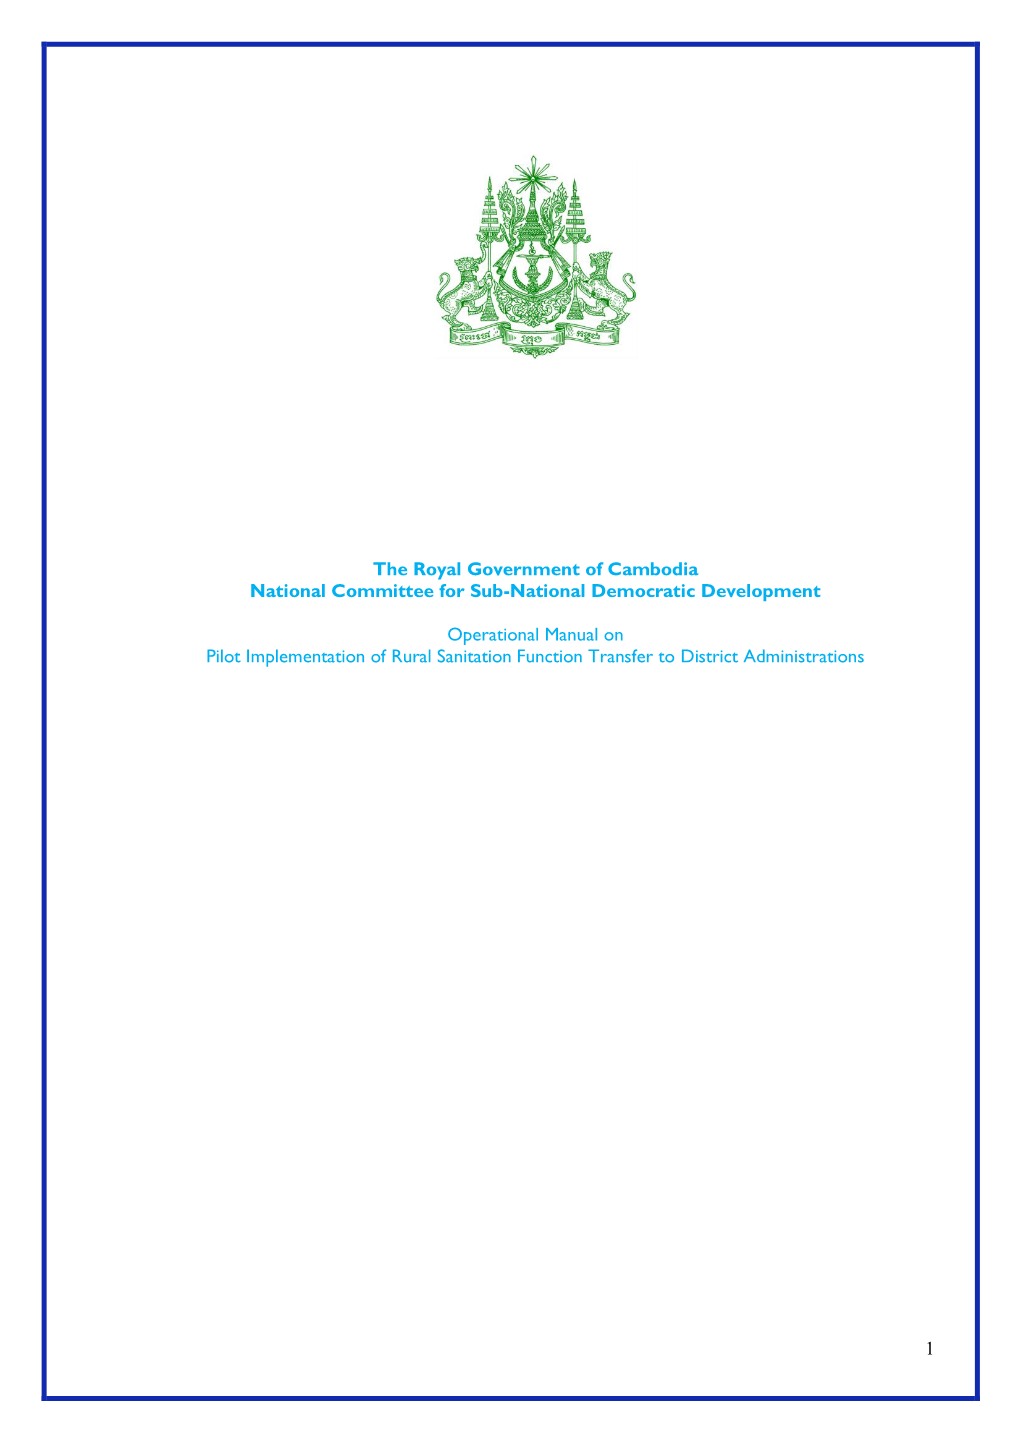 1 the Royal Government of Cambodia National Committee for Sub-National Democratic Development Operational Manual on Pilot Implem